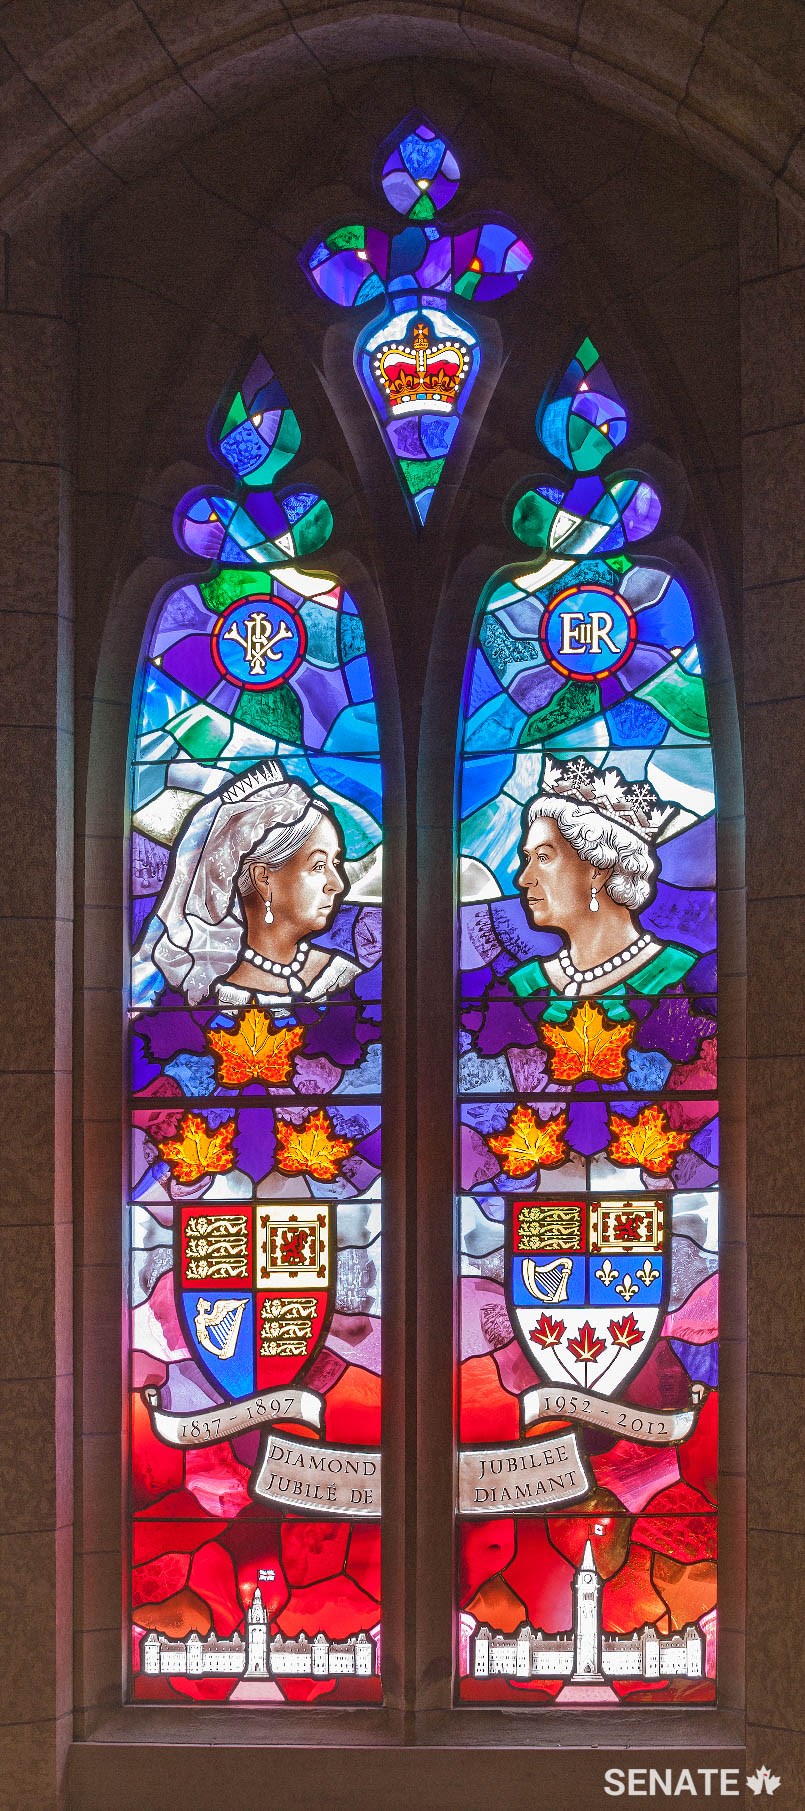 This window commemorates the Diamond Jubilee of Queen Elizabeth II in 2012, marking her 60 years on the throne. It juxtaposes her likeness with that of her great great grandmother, Queen Victoria, who celebrated her Diamond Jubilee in 1897.